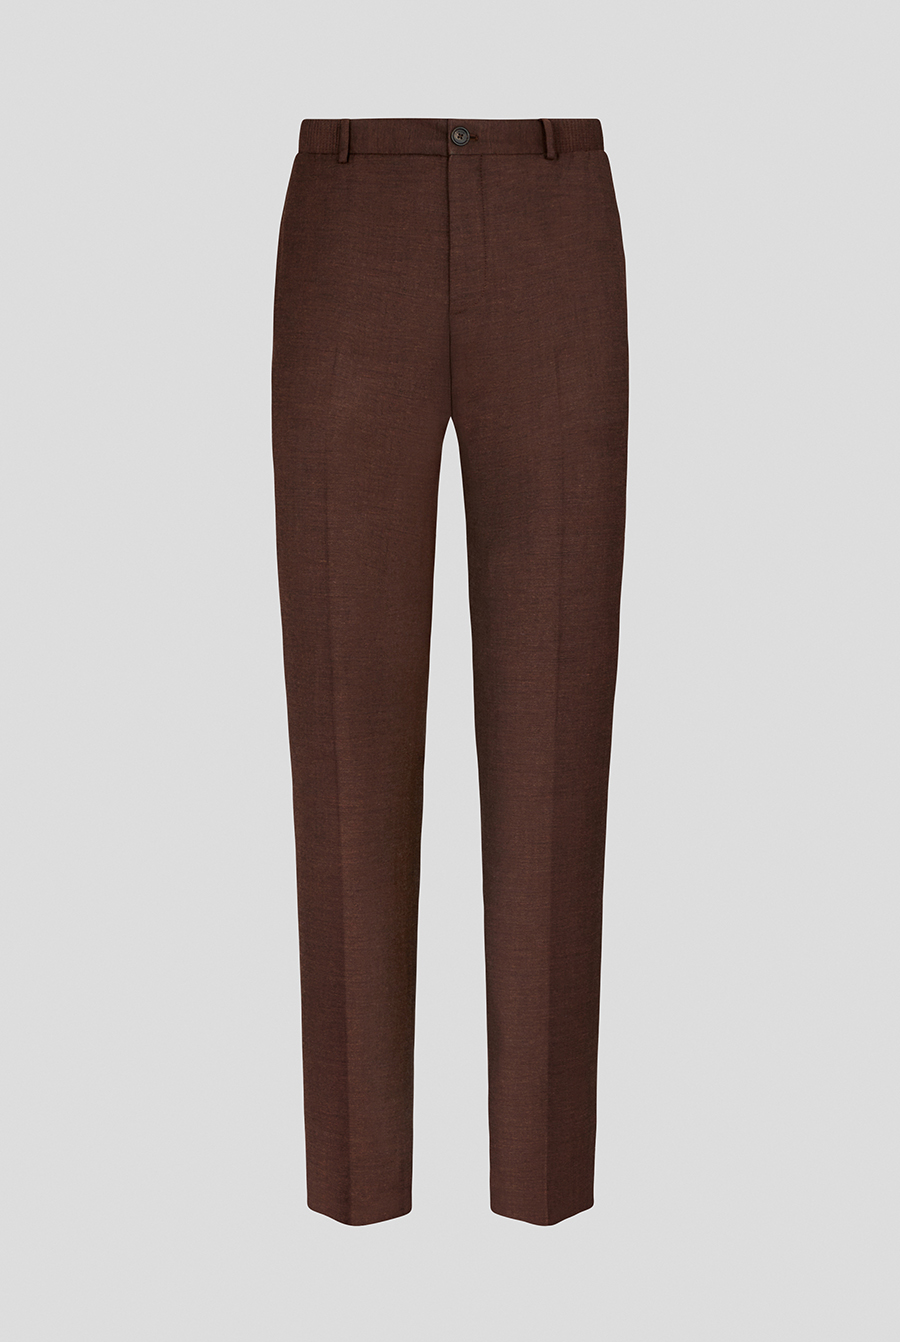 The Lowry mid-rise slim fit printed trousers